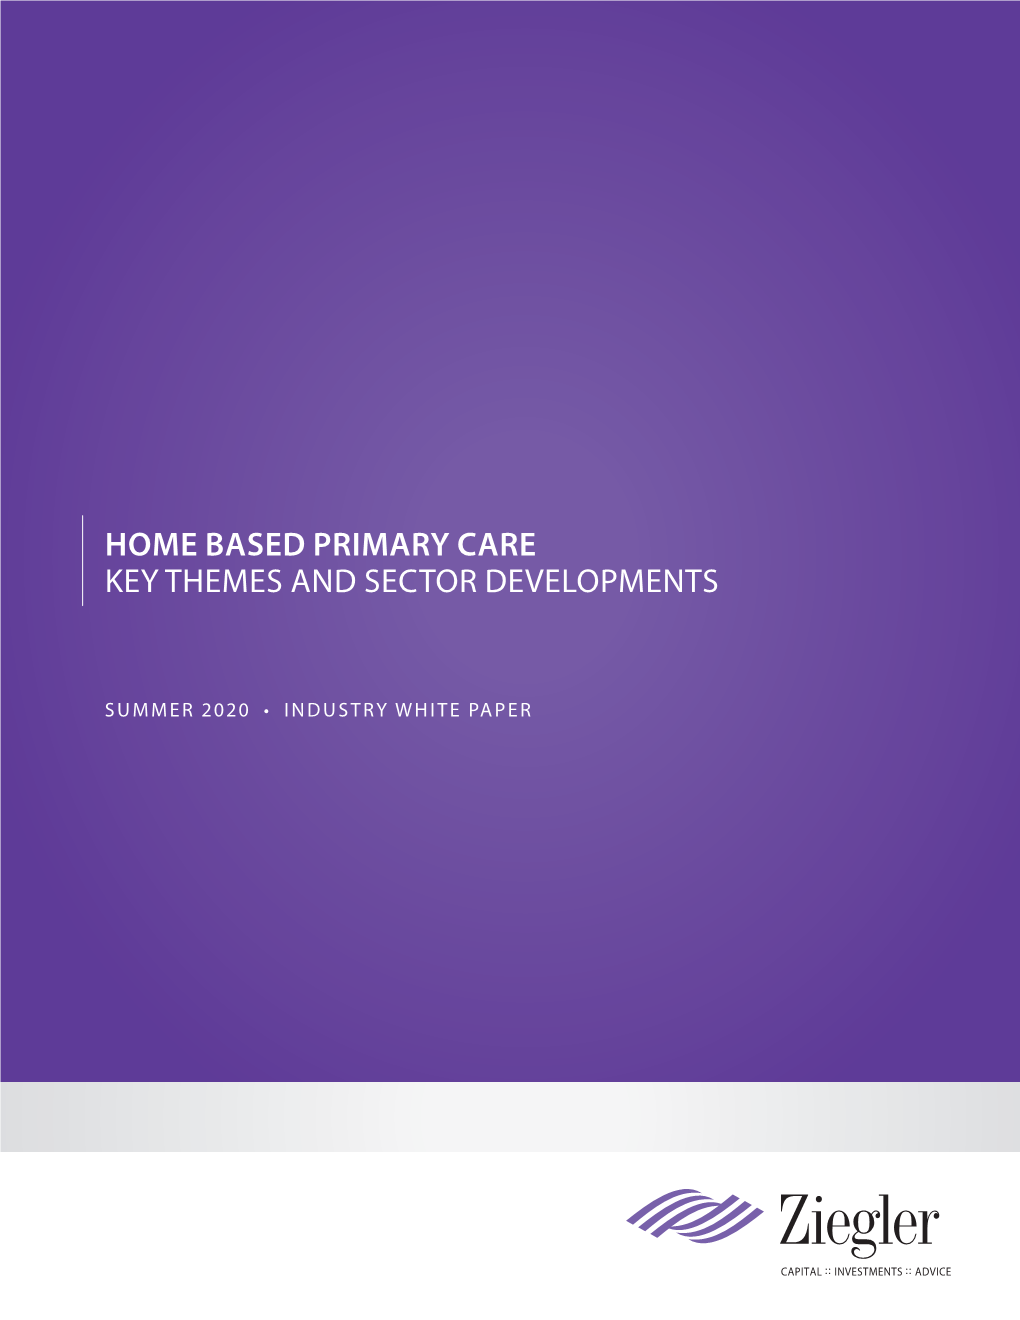 Home Based Primary Care Key Themes and Sector Developments